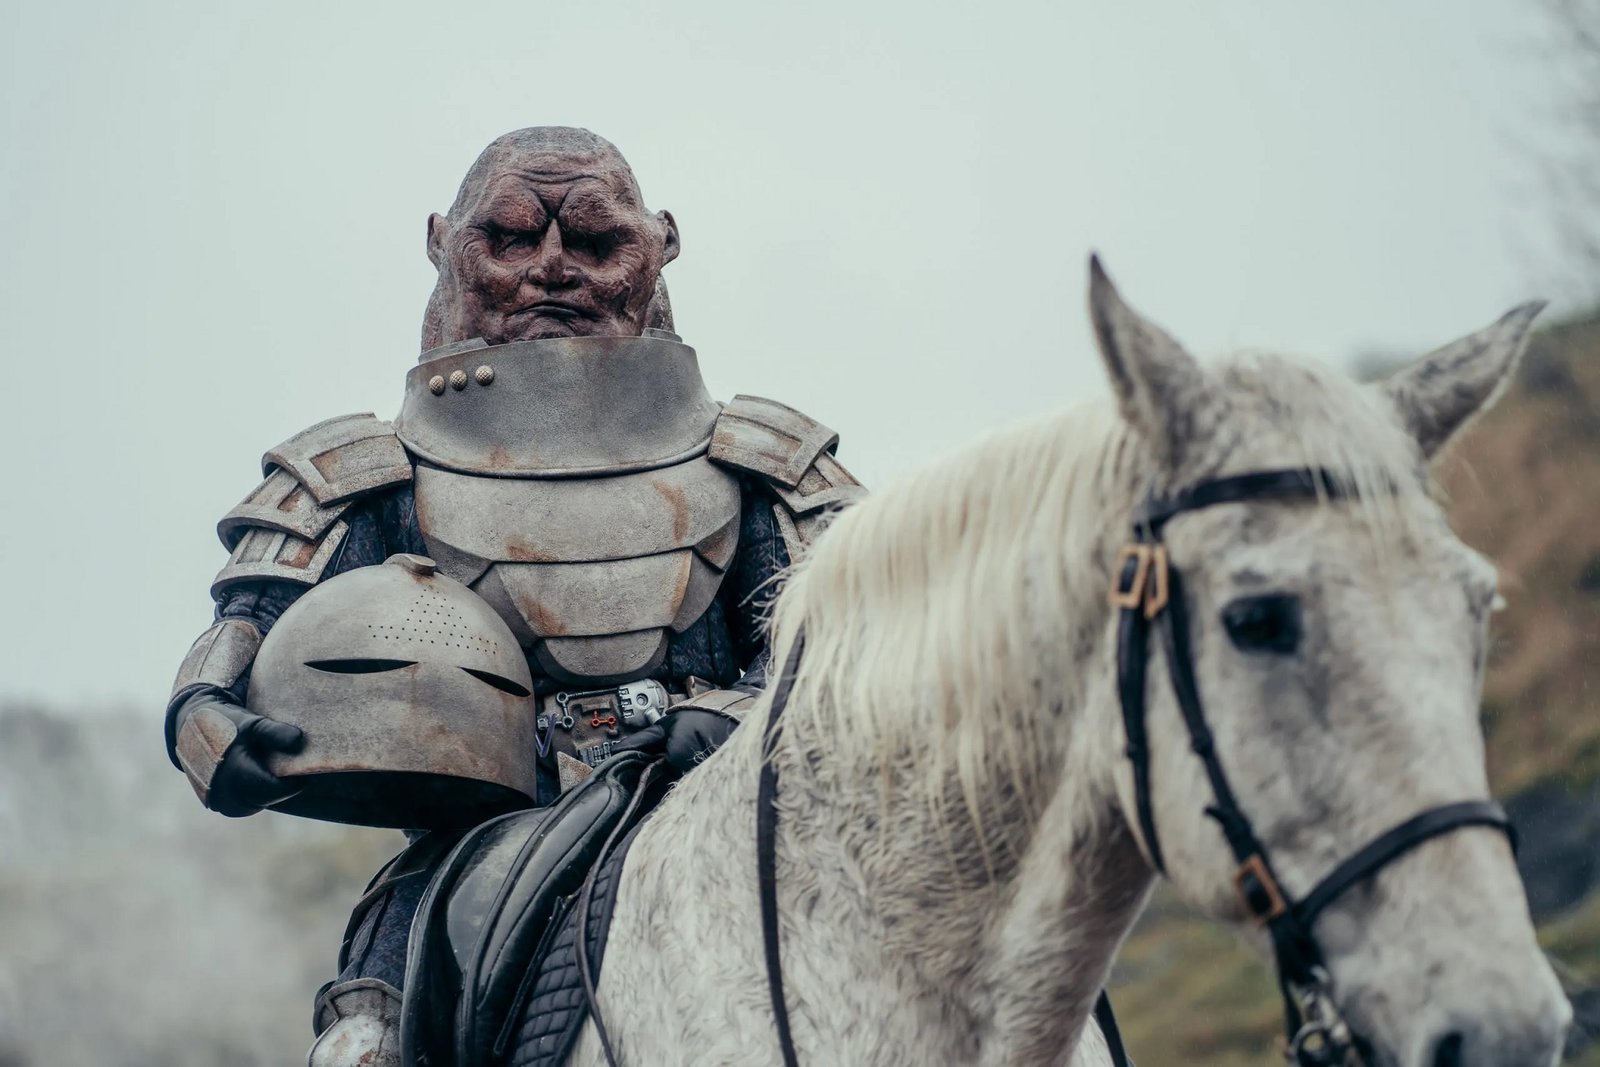 Doctor Who Series 13 Episode 2 Title Teases Sontarans in the Crimean War